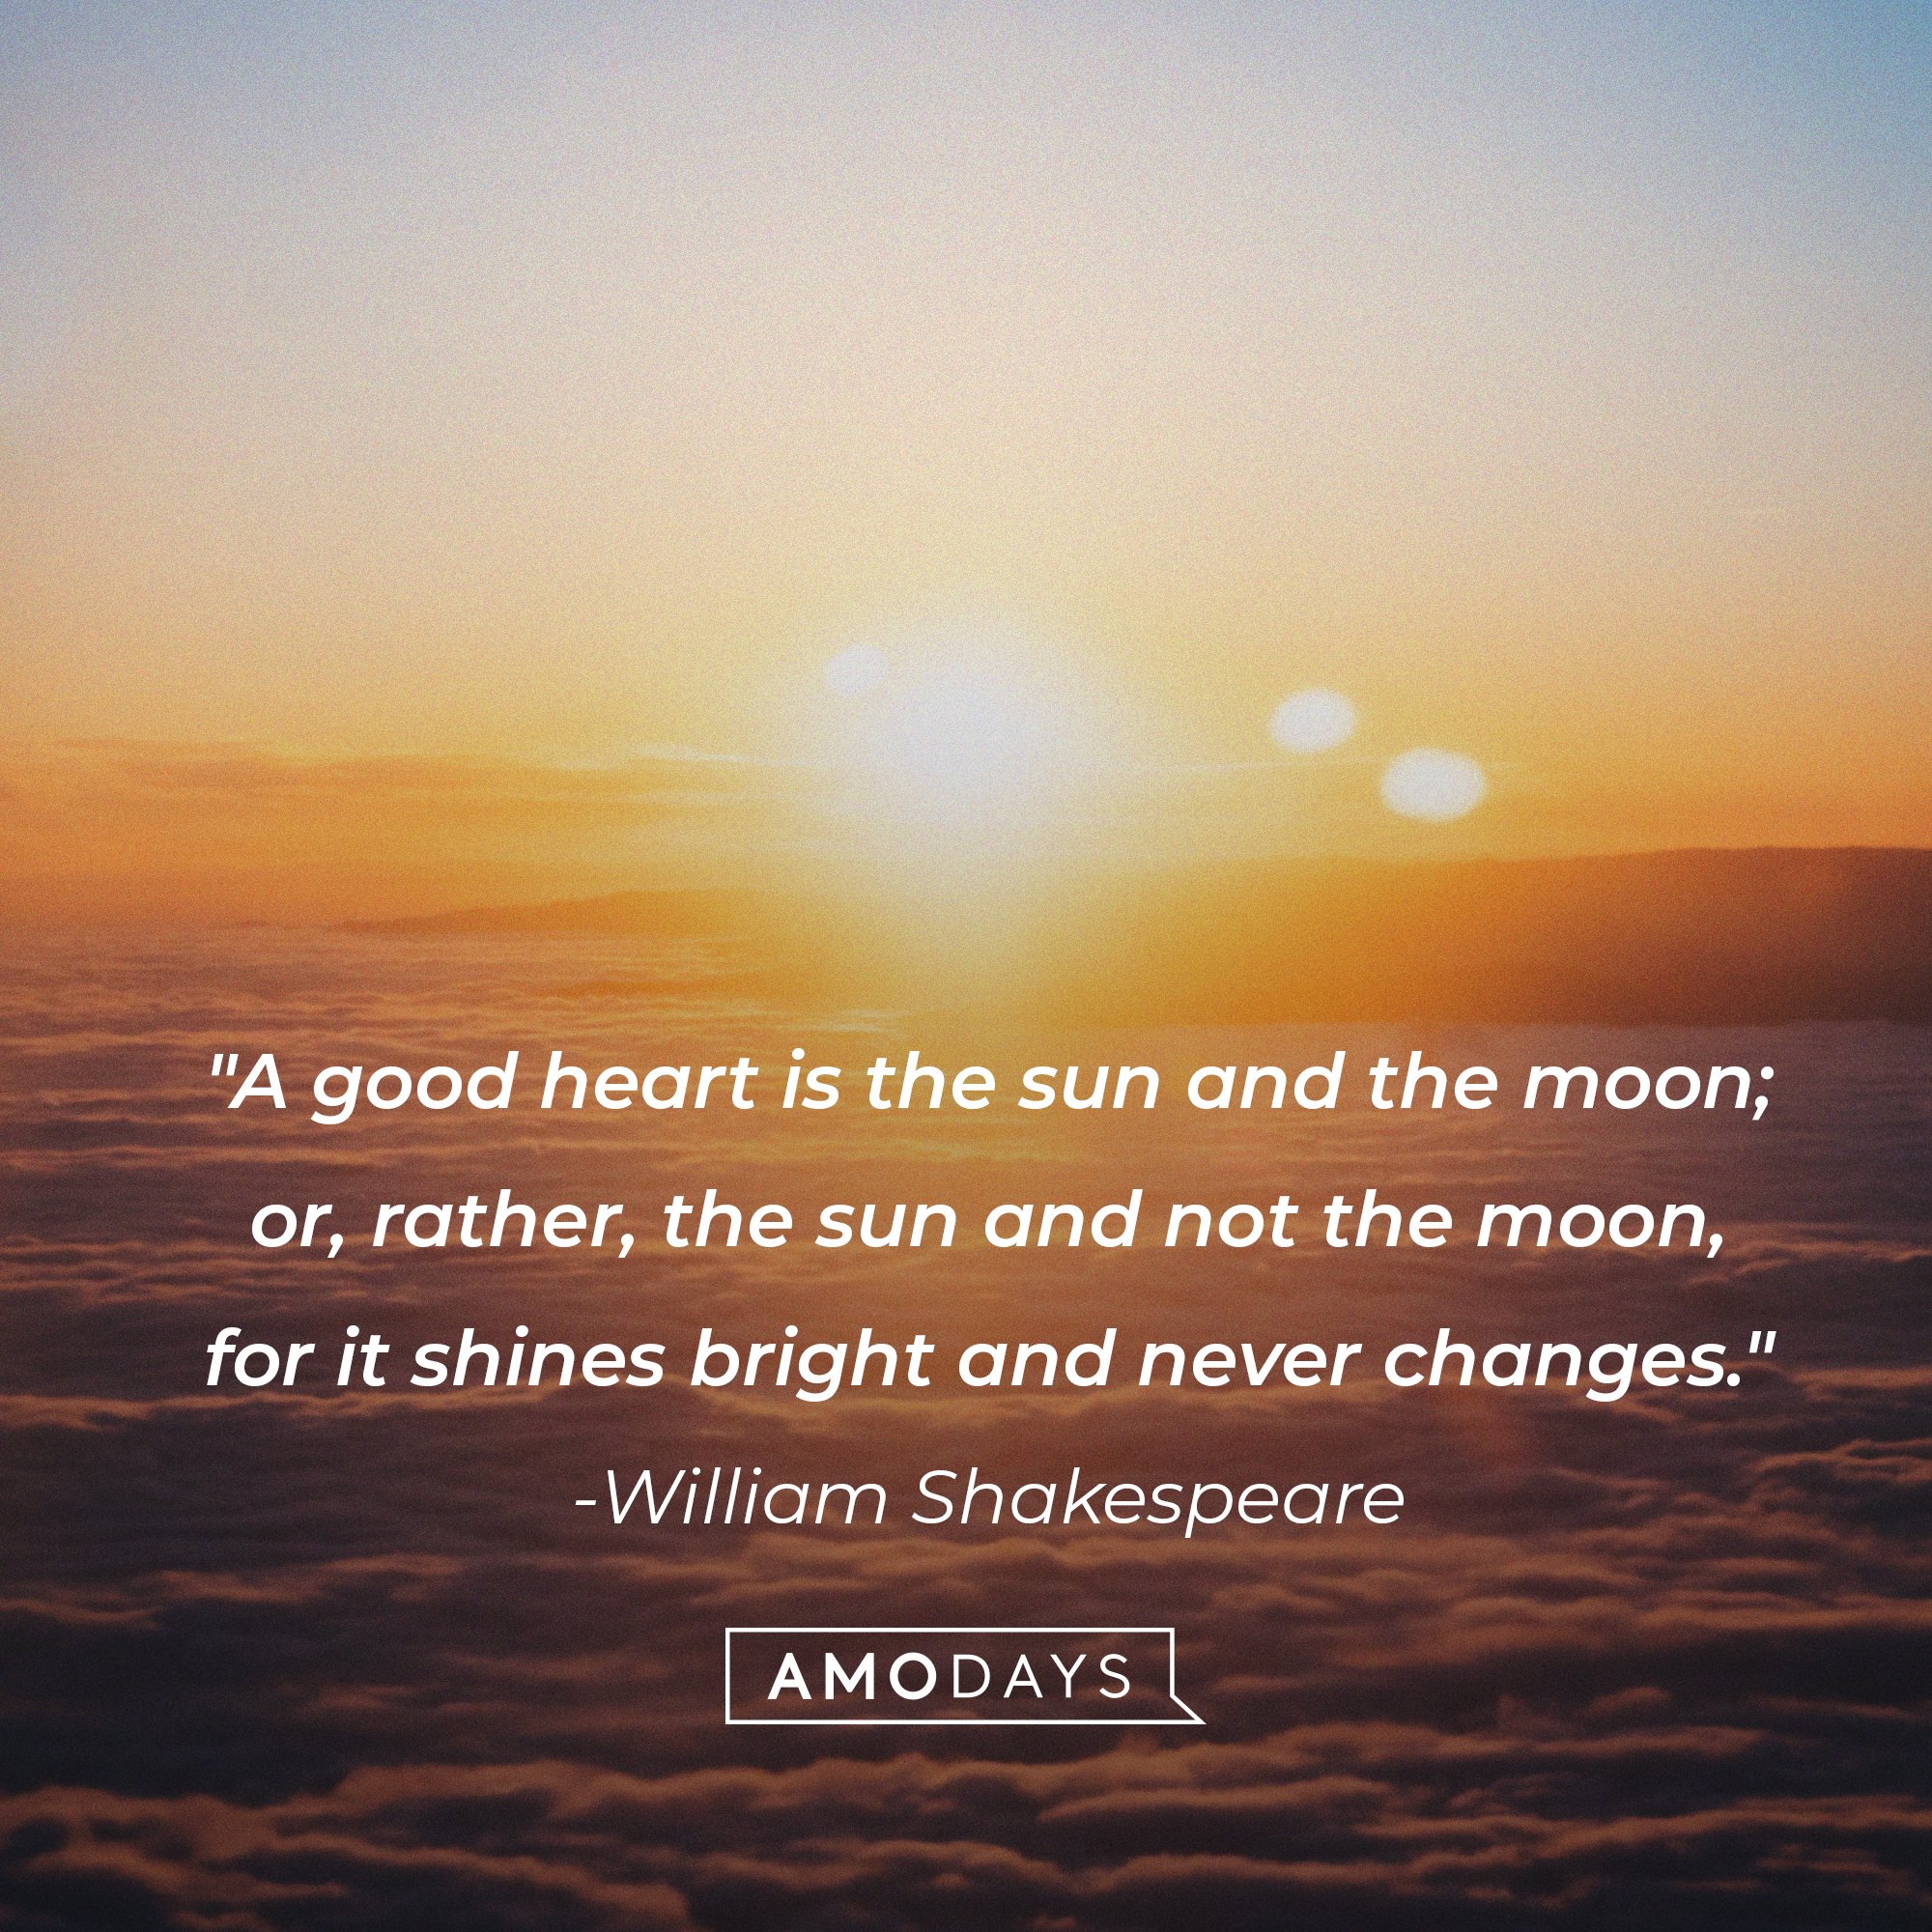 William Shakespeare’s quote: "A good heart is the sun and the moon; or, rather, the sun and not the moon, for it shines bright and never changes." | Image: AmoDays